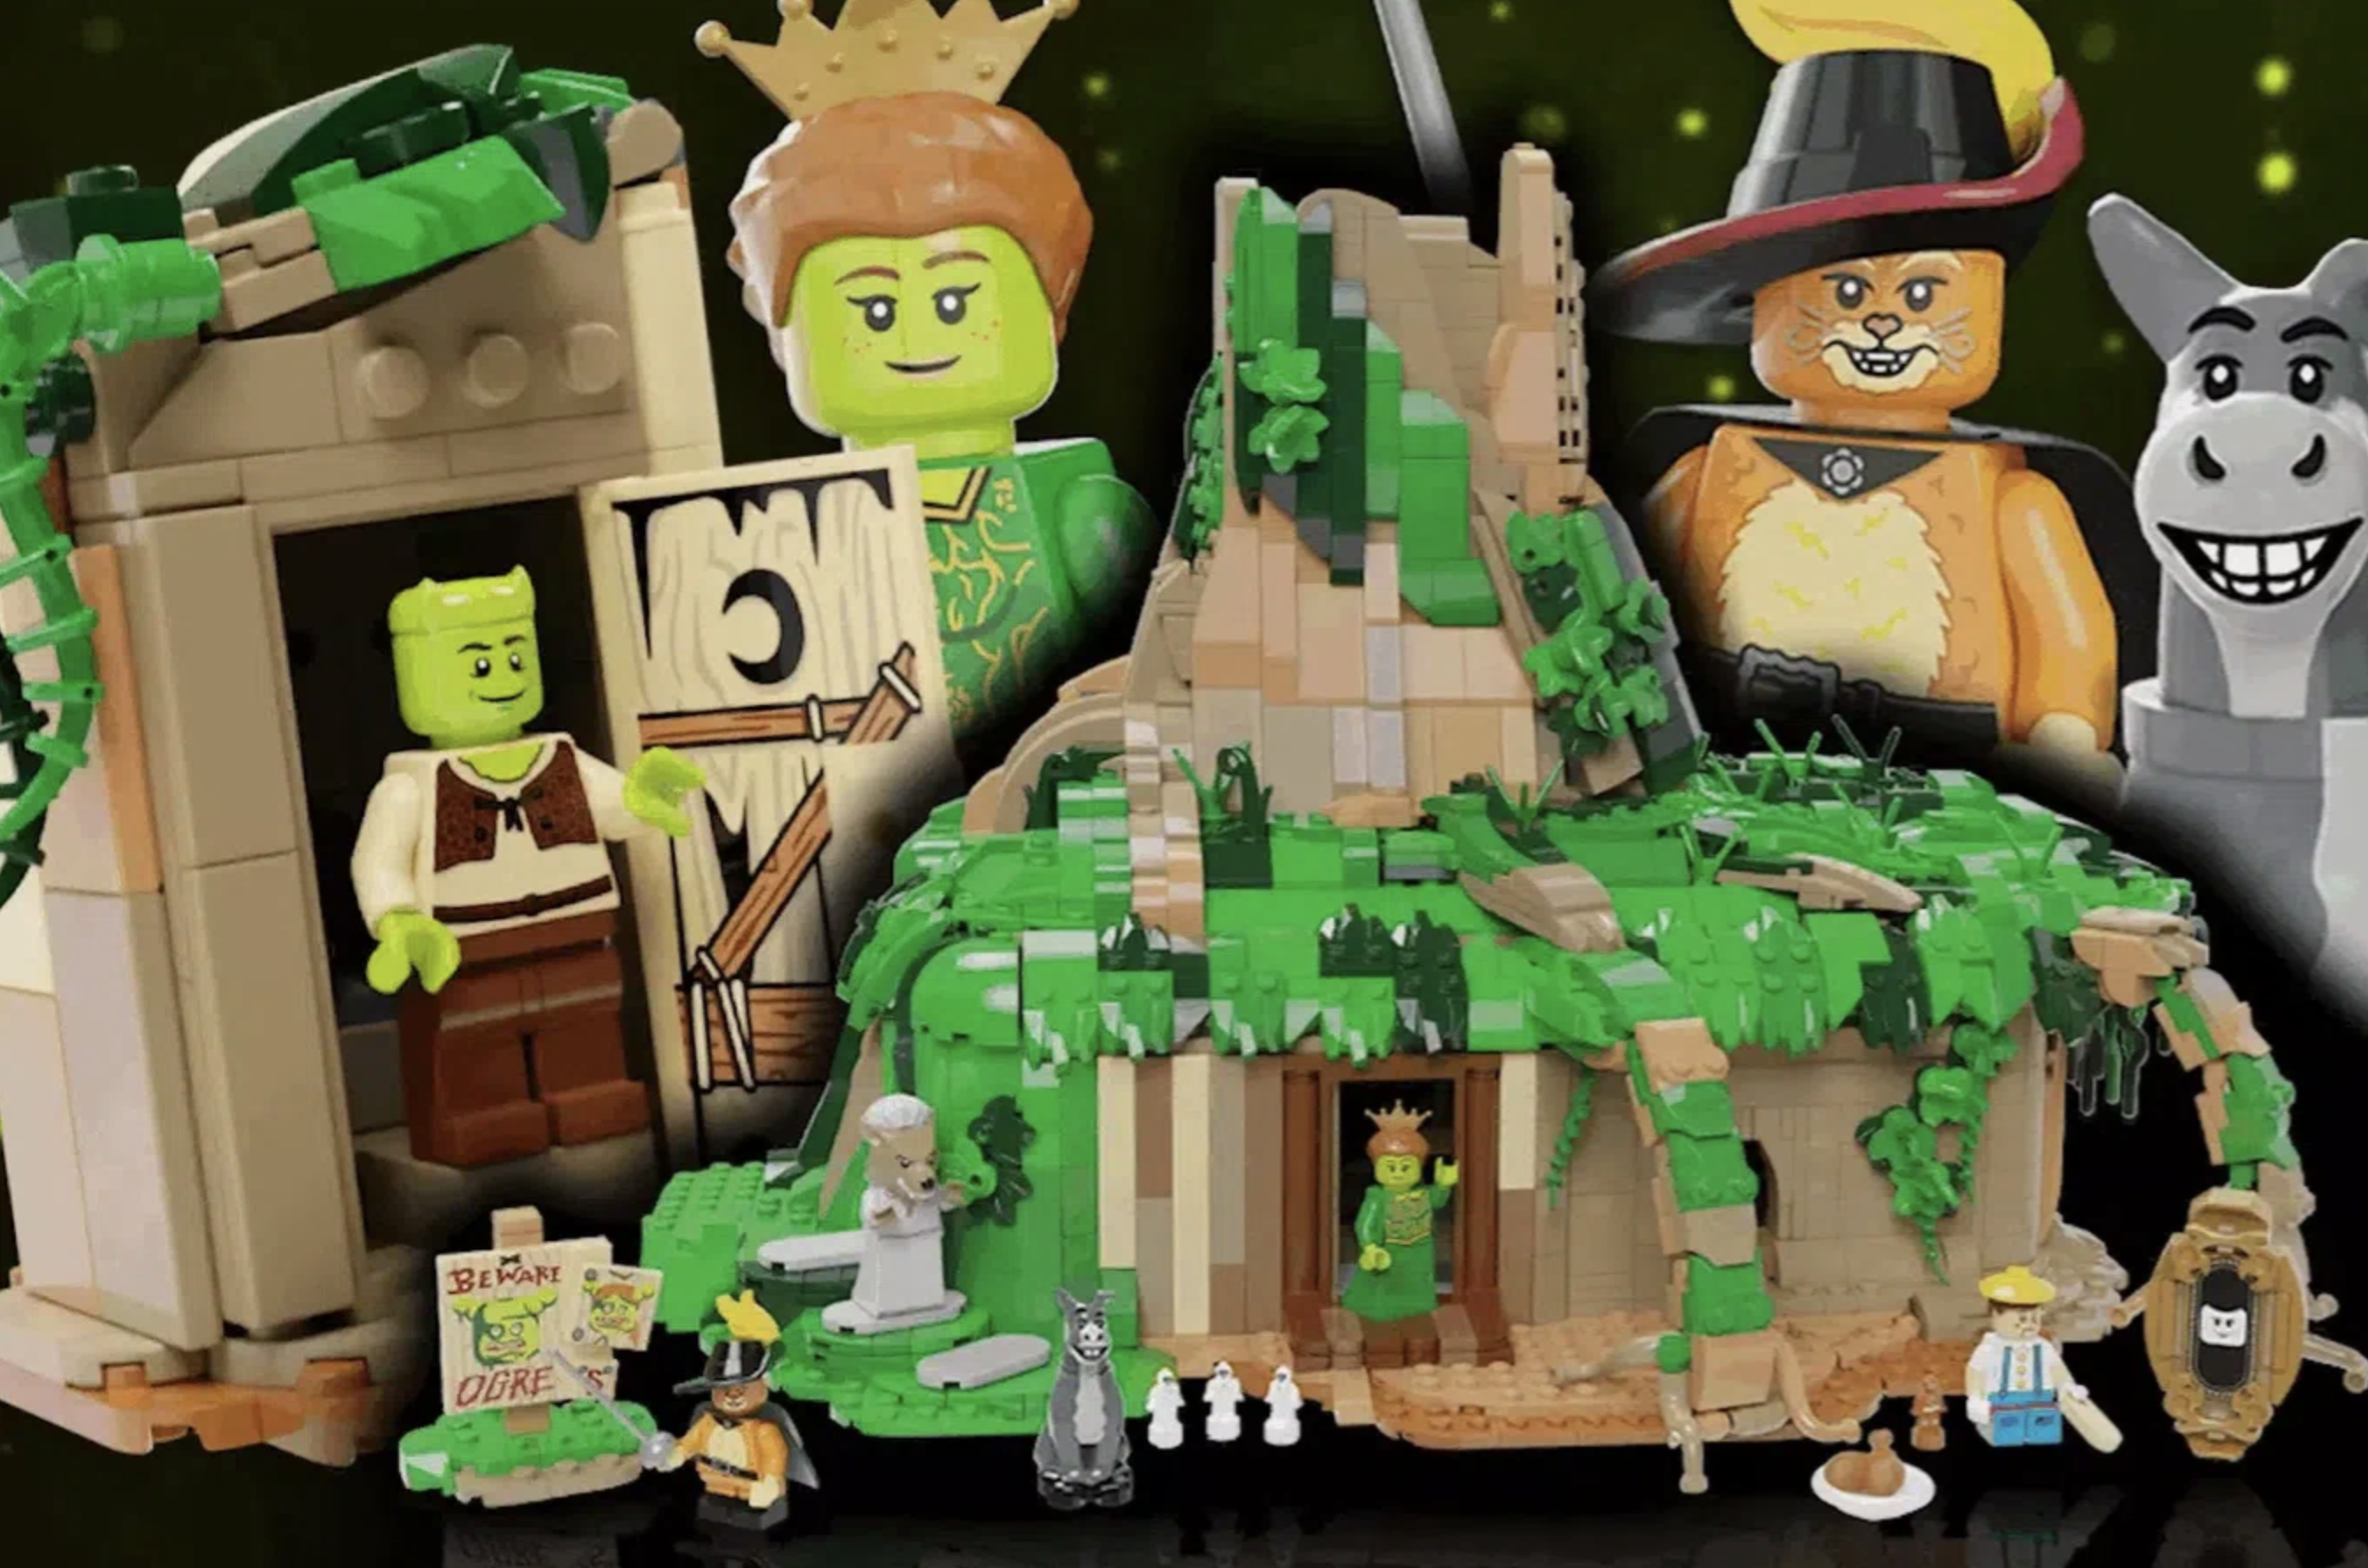 A LEGO Shrek's Swamp could be your next set